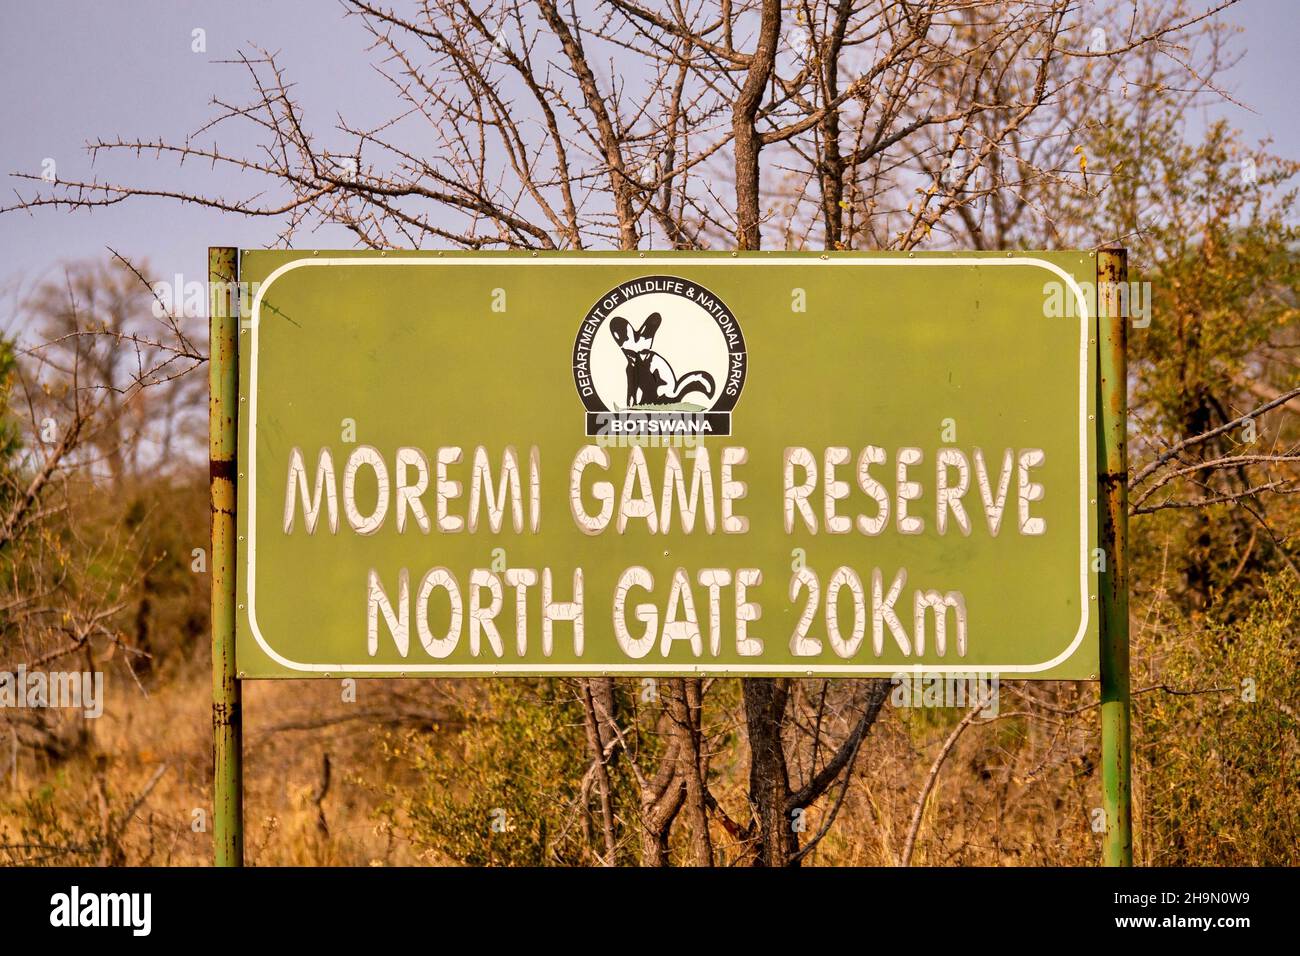 Moremi Game Reserve, Botswana - September 30, 2014. A road sign for the north gate entrance and exit of the wildife park. Stock Photo